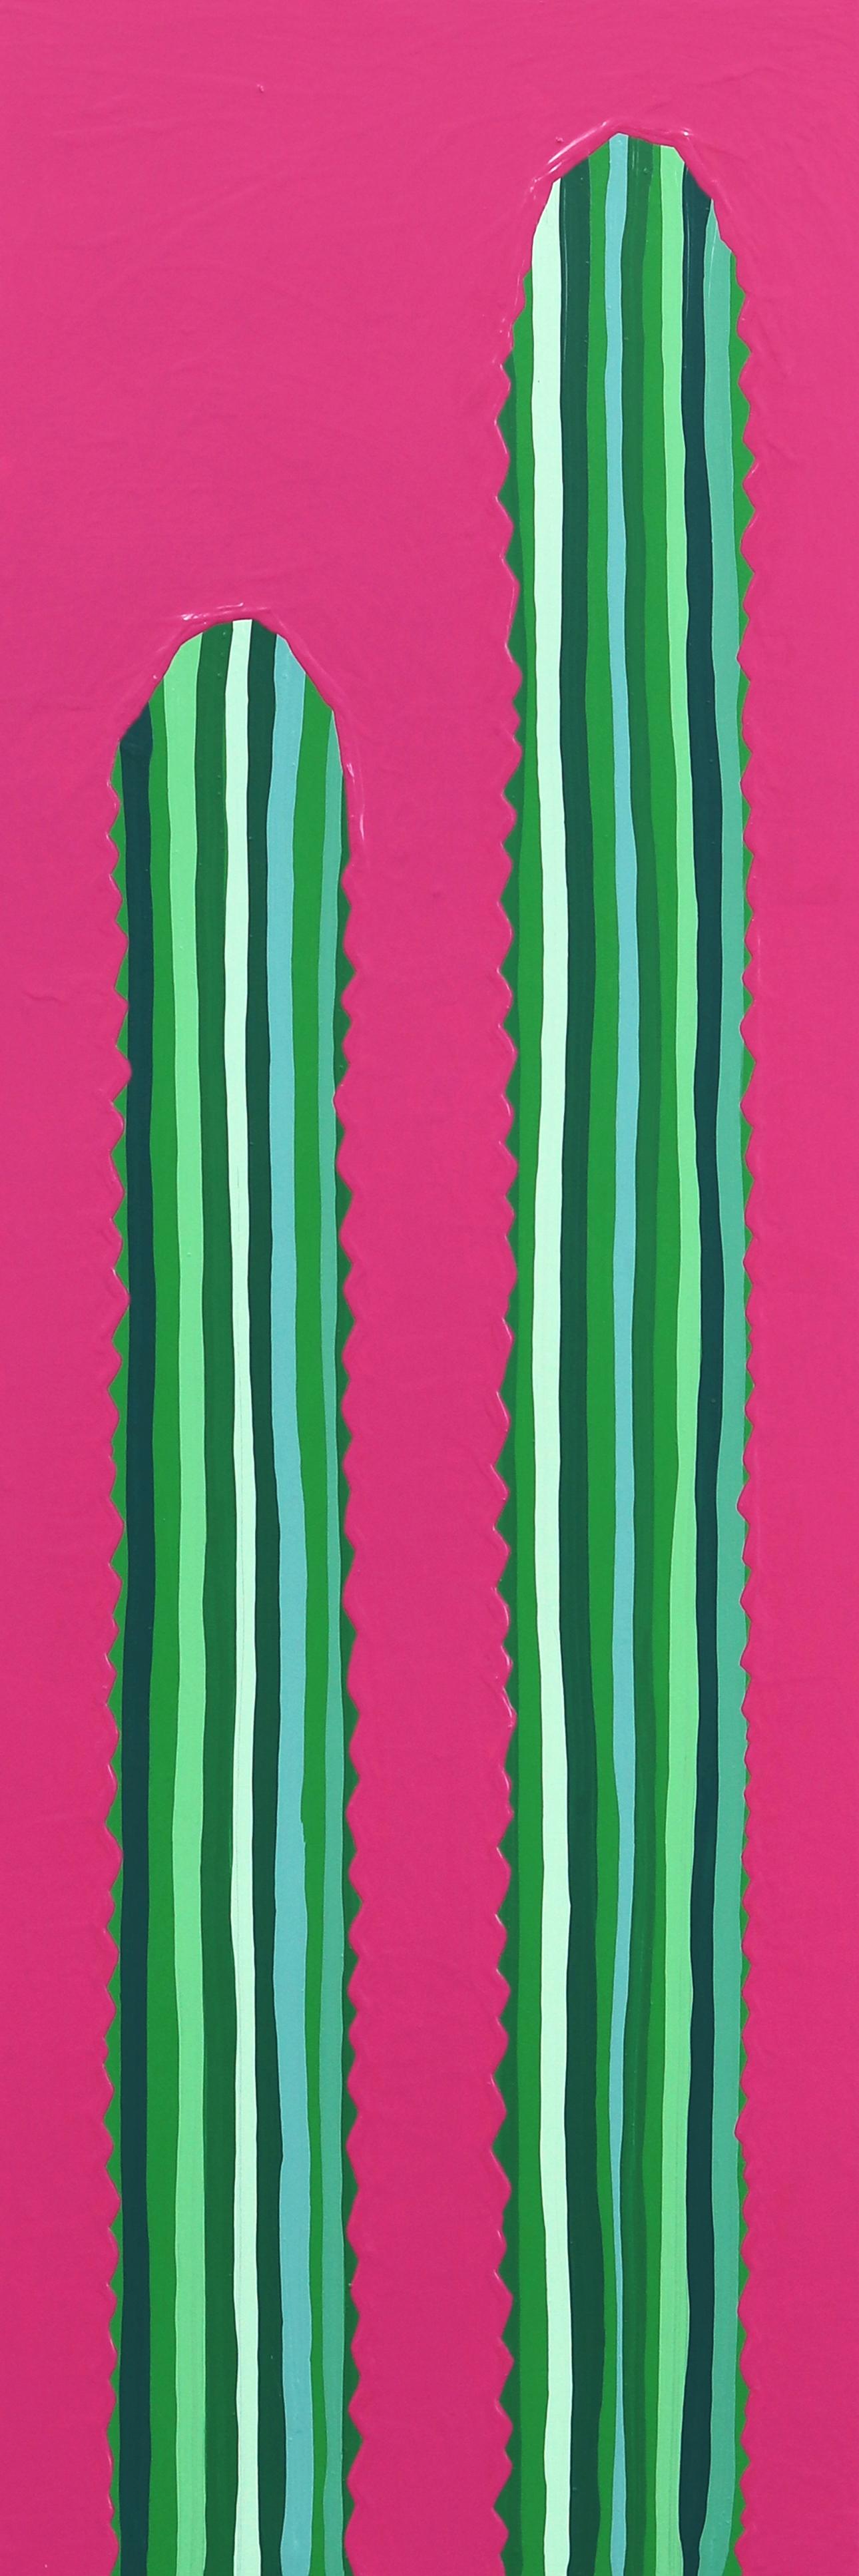 Will Beger Figurative Painting - Rosa Picante - Vibrant Pink Green Southwest Inspired Pop Art Cactus Painting